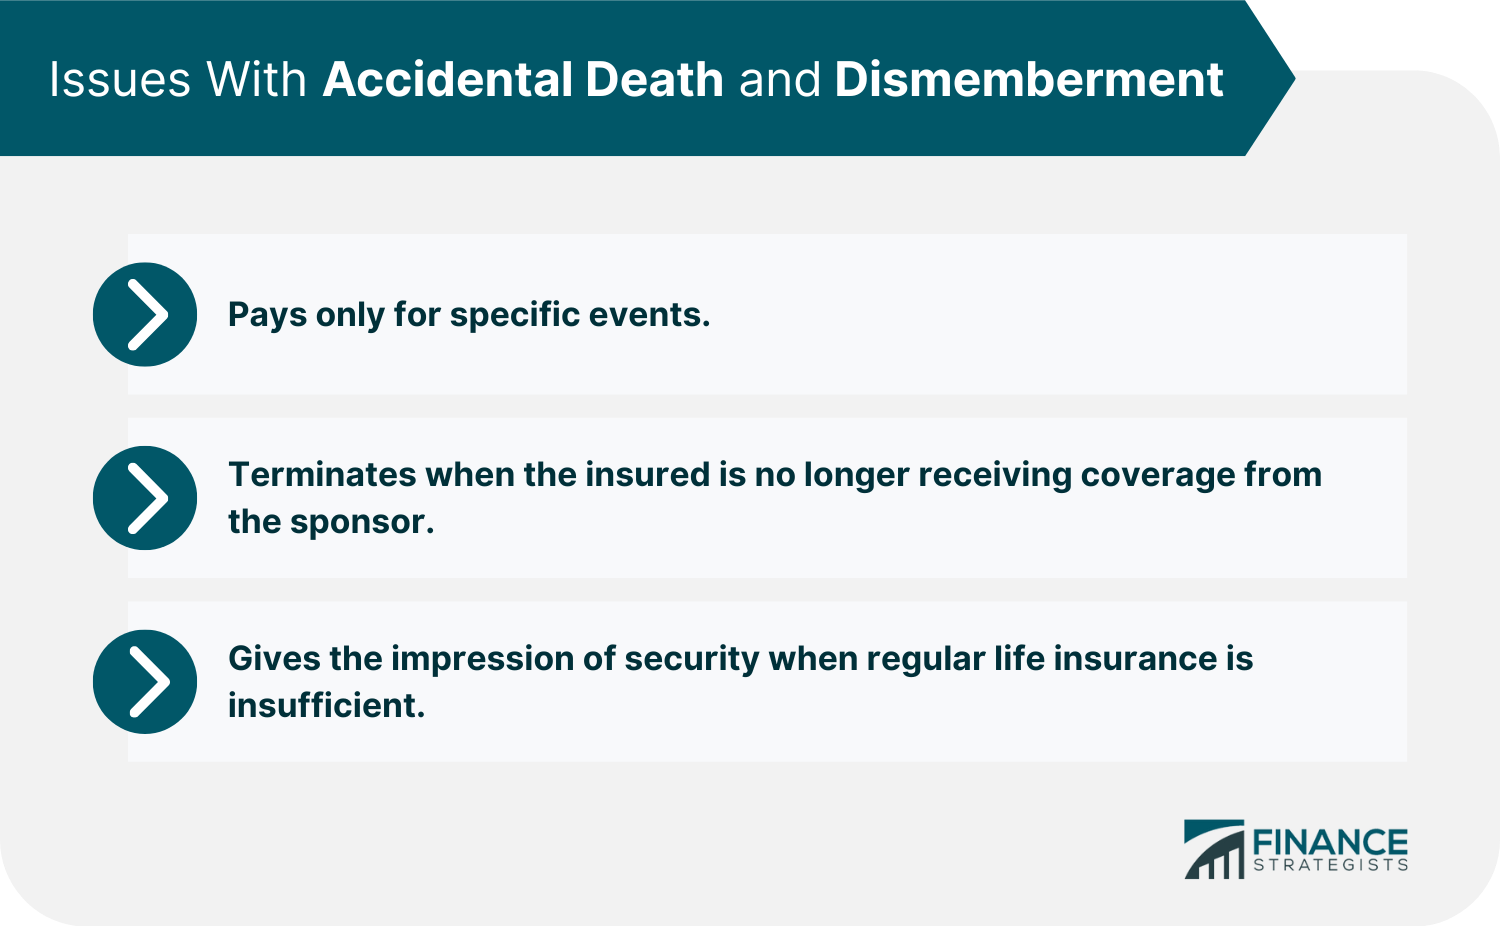 Issues With Accidental Death and Dismemberment